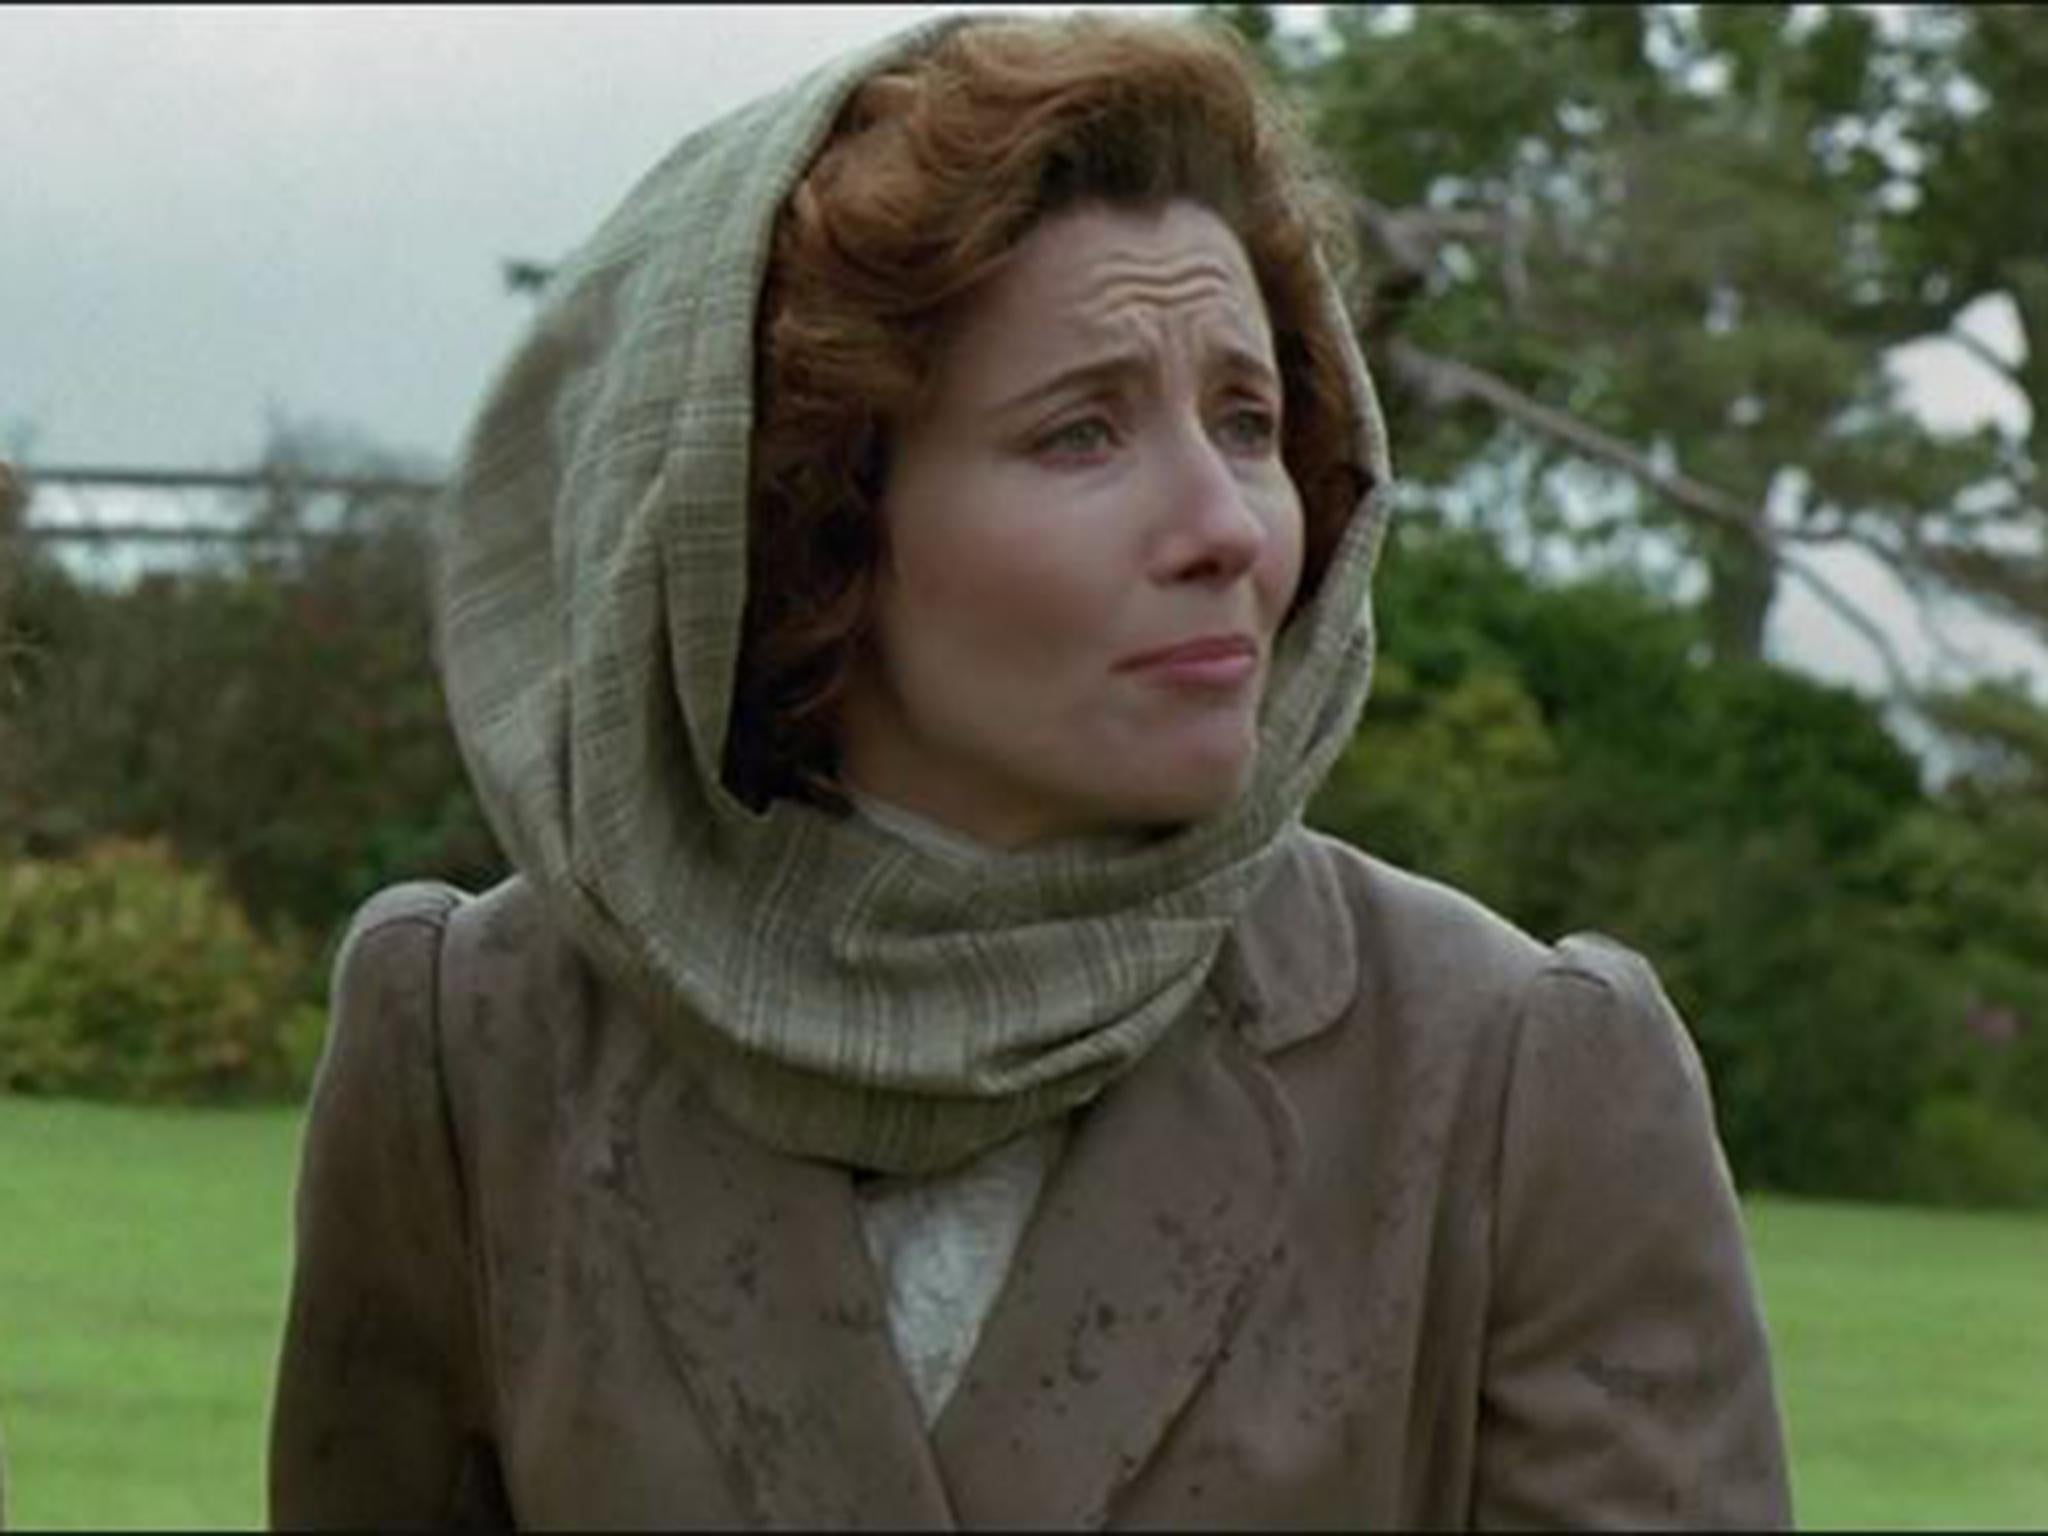 Thompson won an Oscar and a BAFTA for Best Actress for her role in 'Howards End'